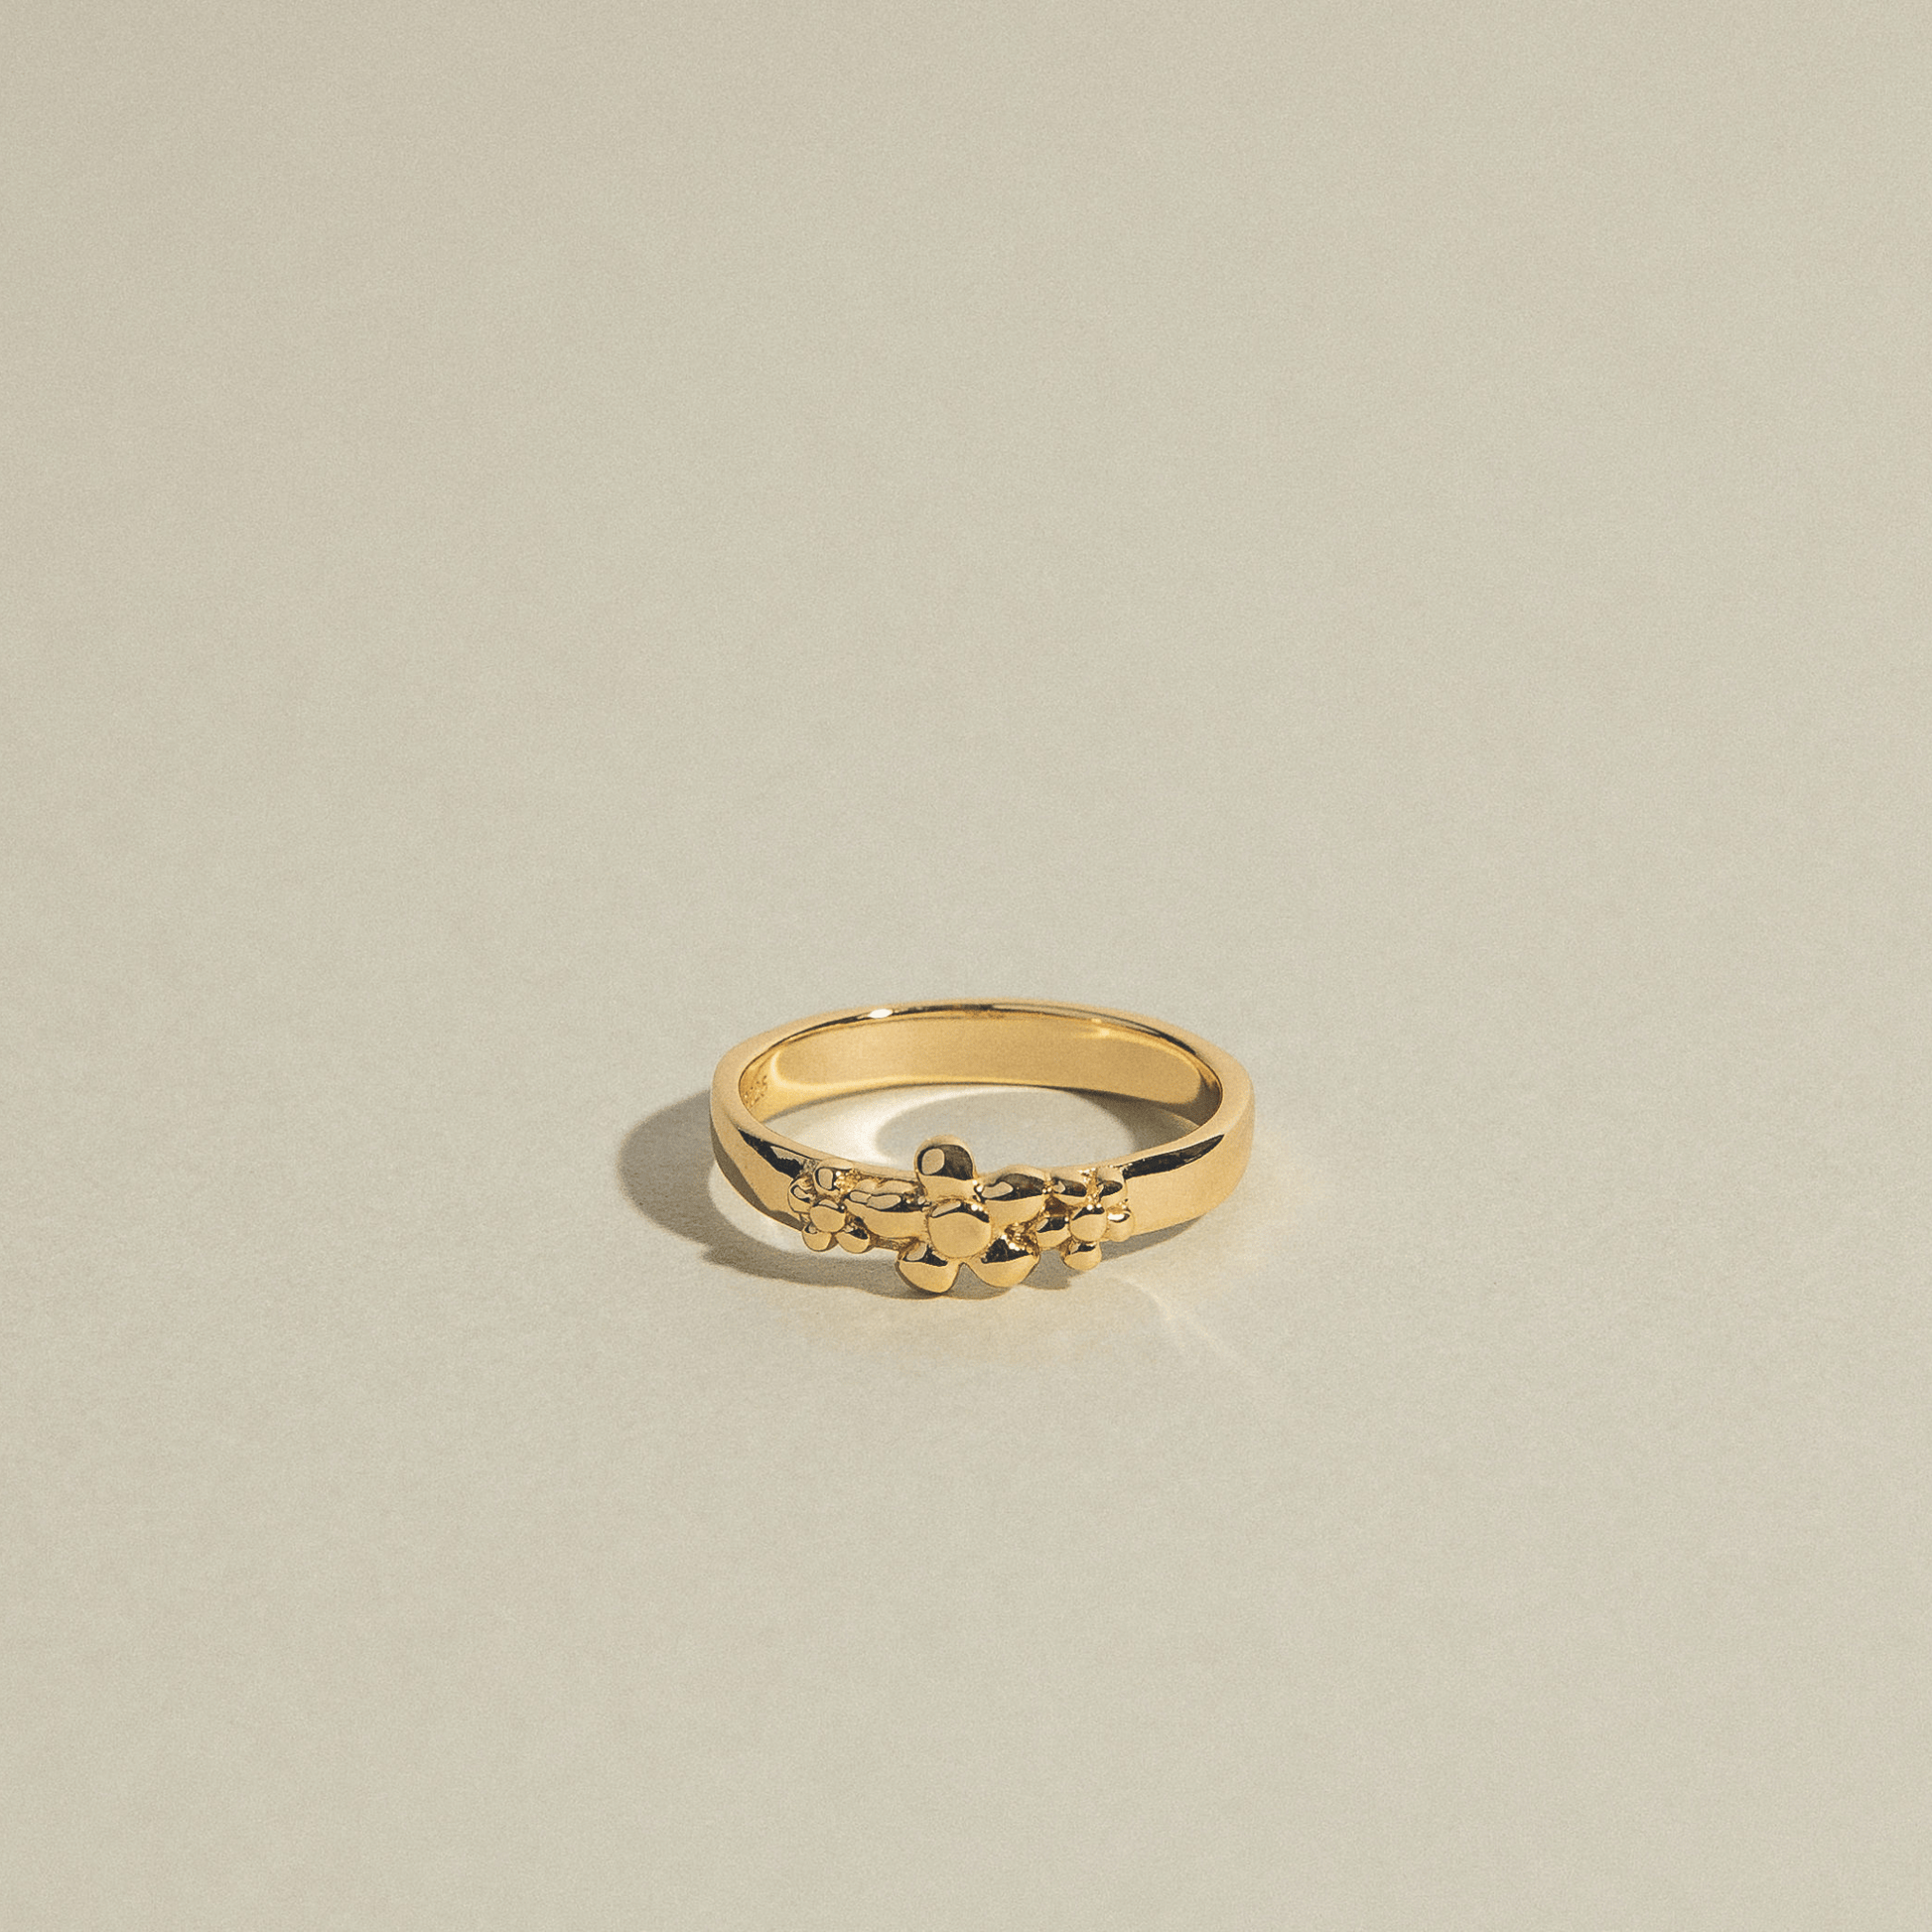 The Frida ring is gold and adorned with three flowers.